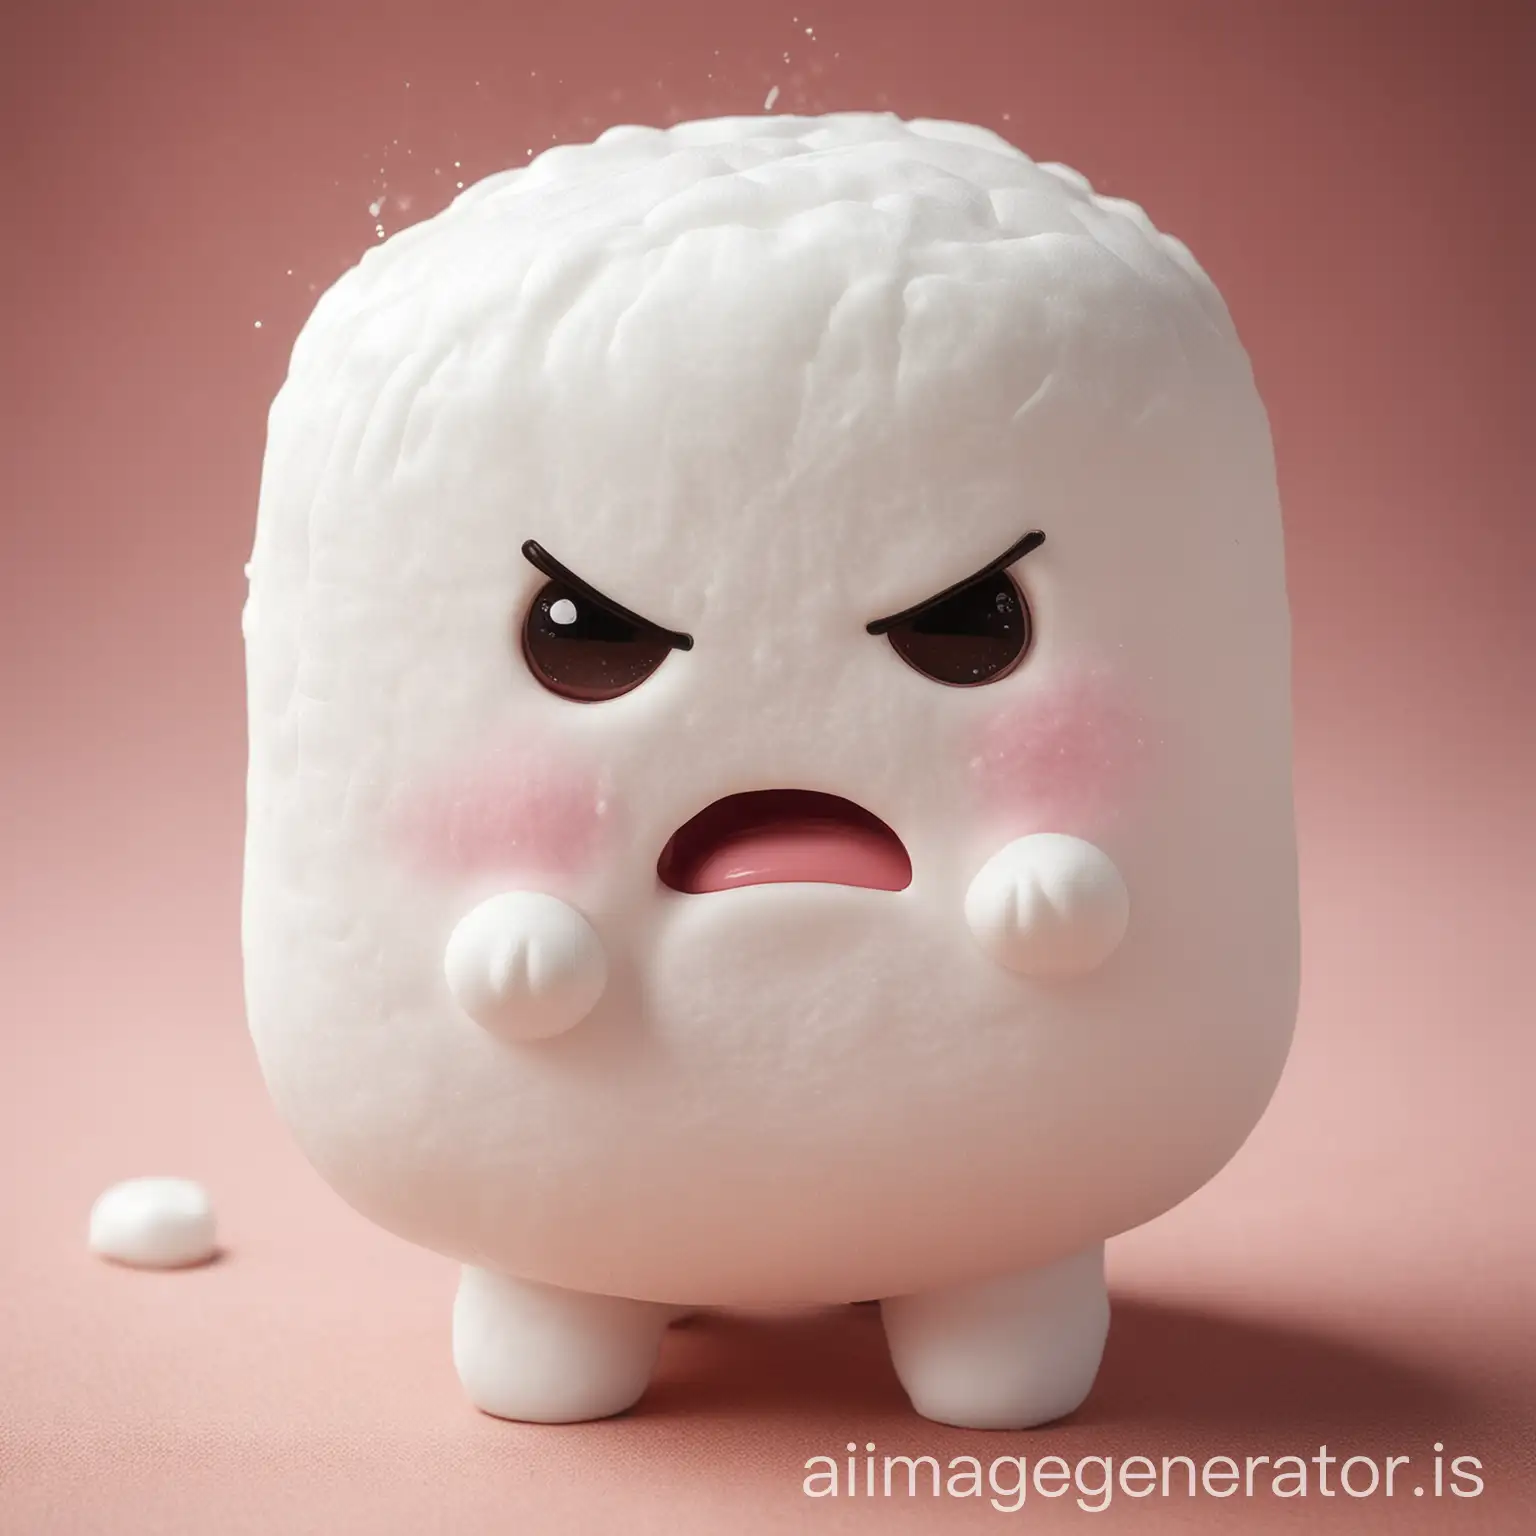 a cute angry marshmallow